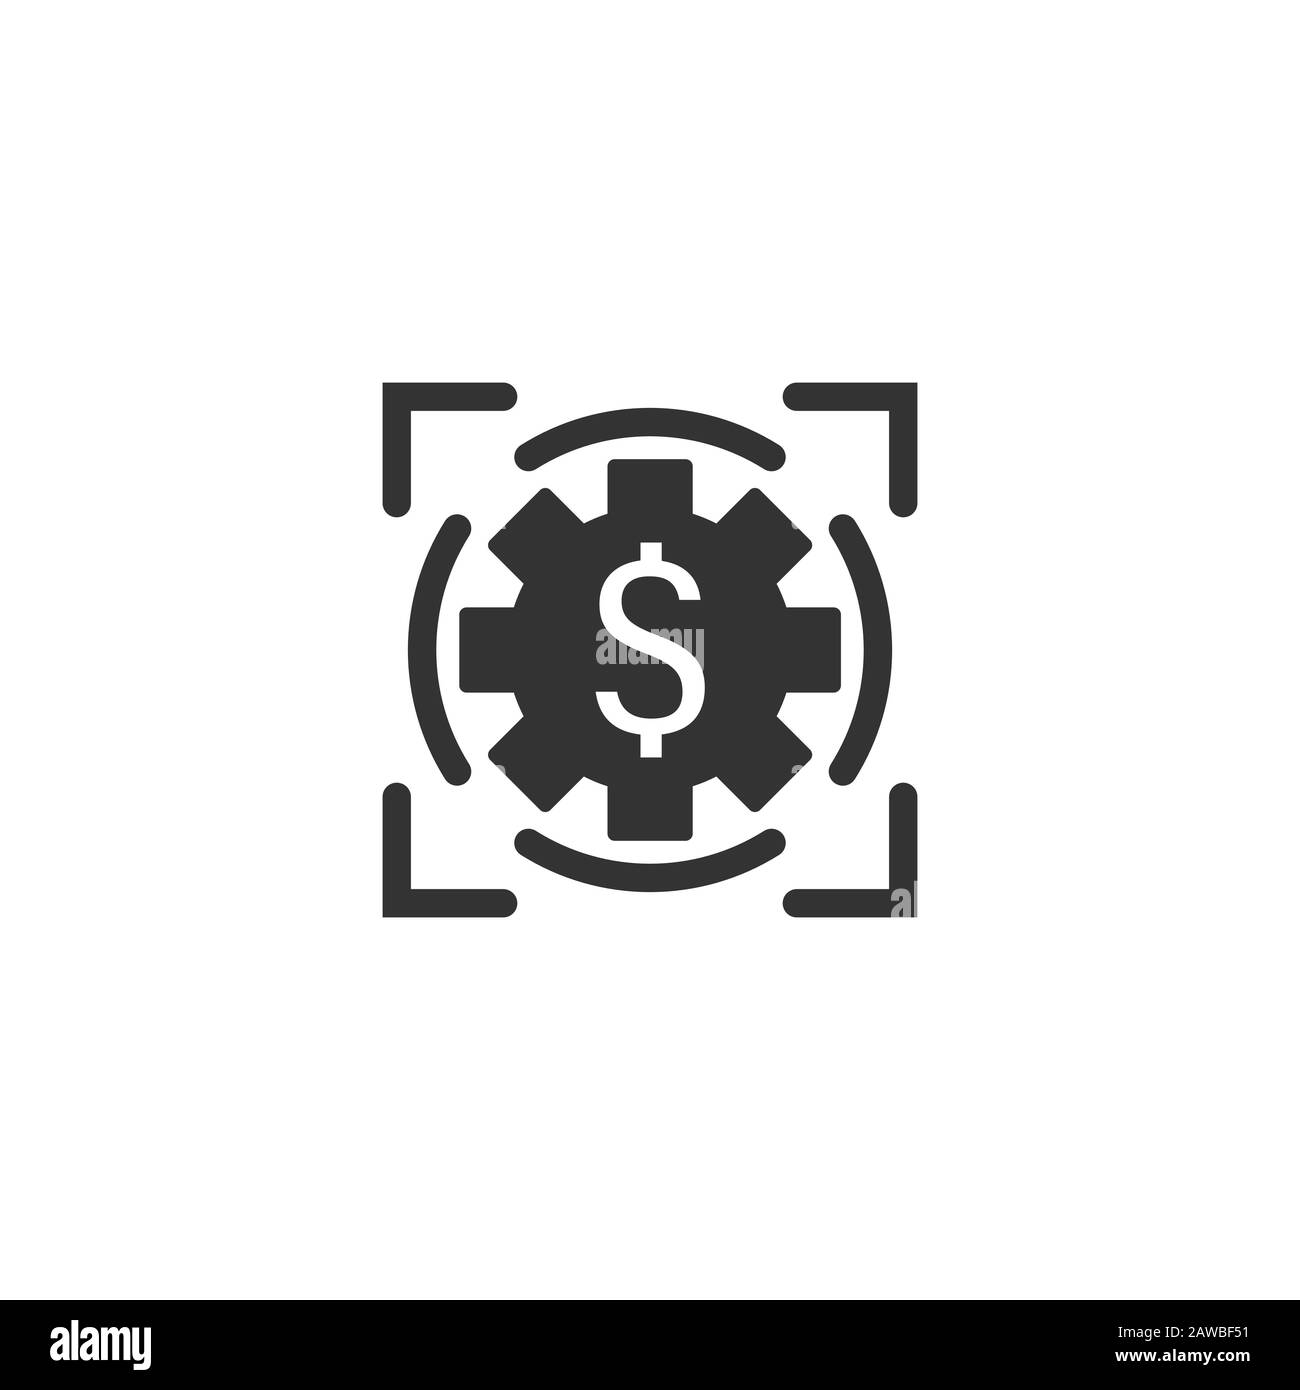 Money revenue icon in flat style. Dollar coin vector illustration on white isolated background. Finance structure business concept. Stock Vector